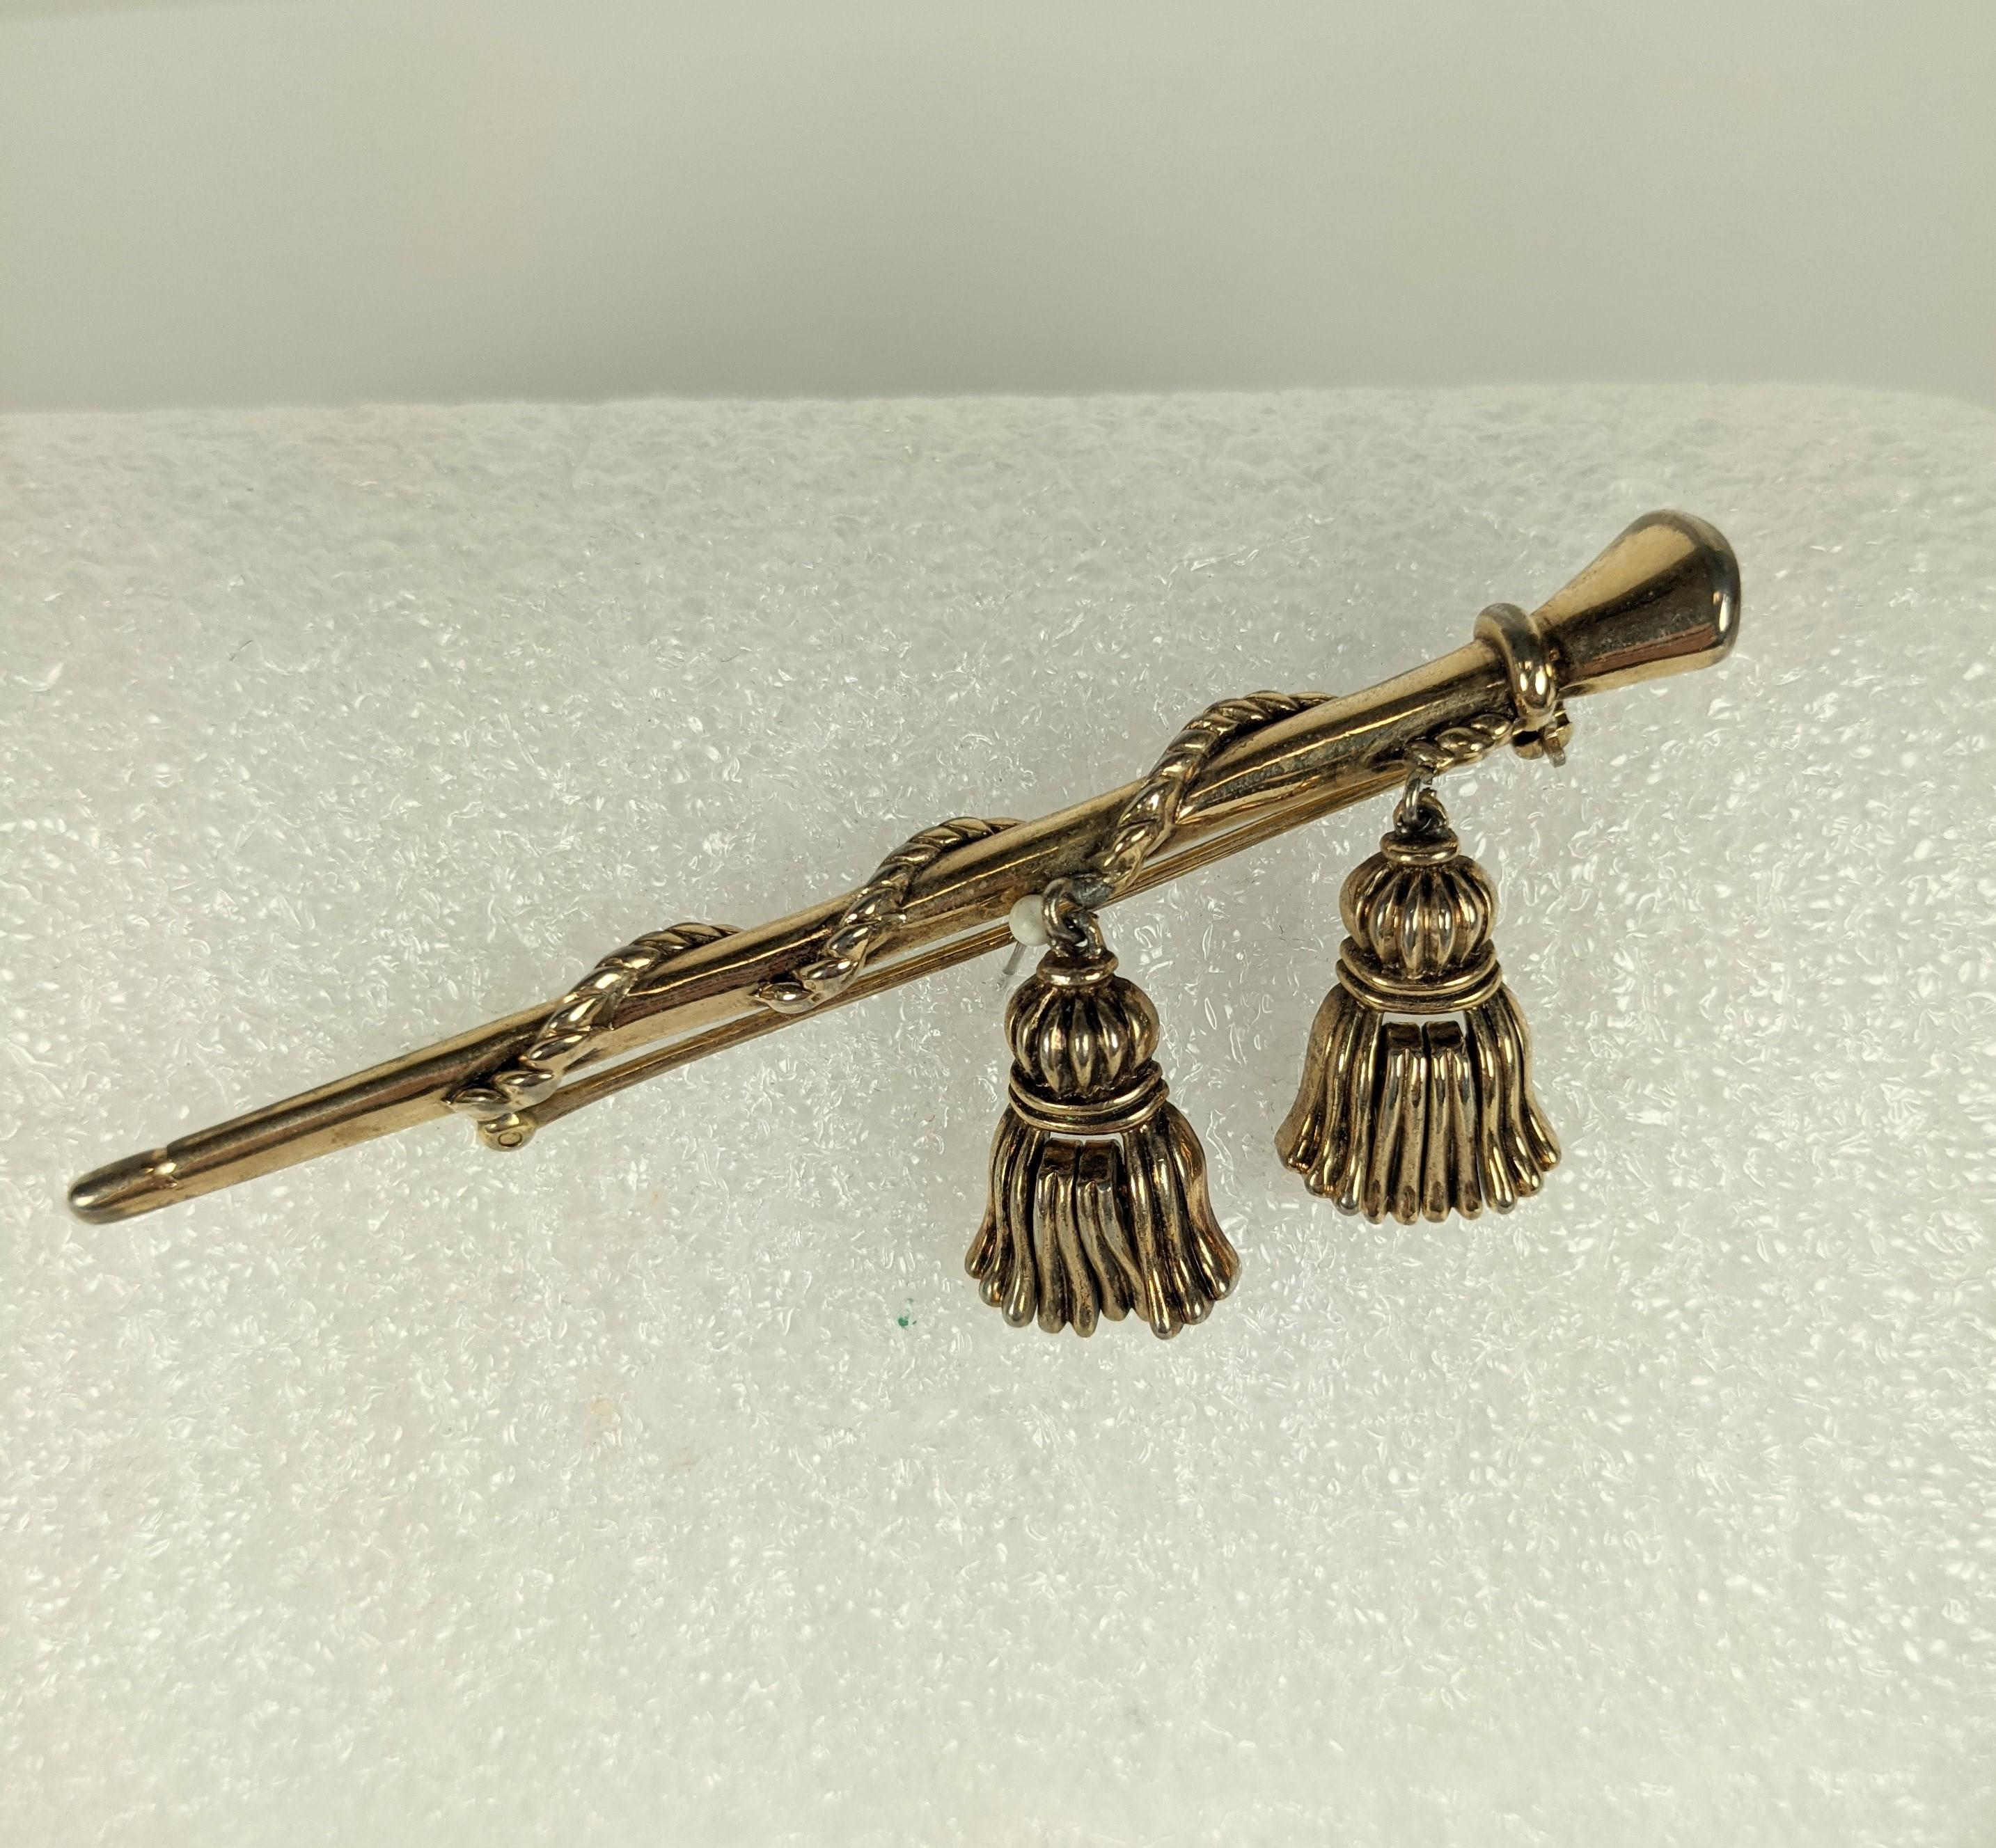 Alfred Phillippe for Trifari Retro tassel baton and matching  tassel ear clips demi parure. Of  base metal with a rose gold plate finish. The tassels are articulated on both brooch and ear clips.
Very good Condition, Signed. 
Brooch L 3.50